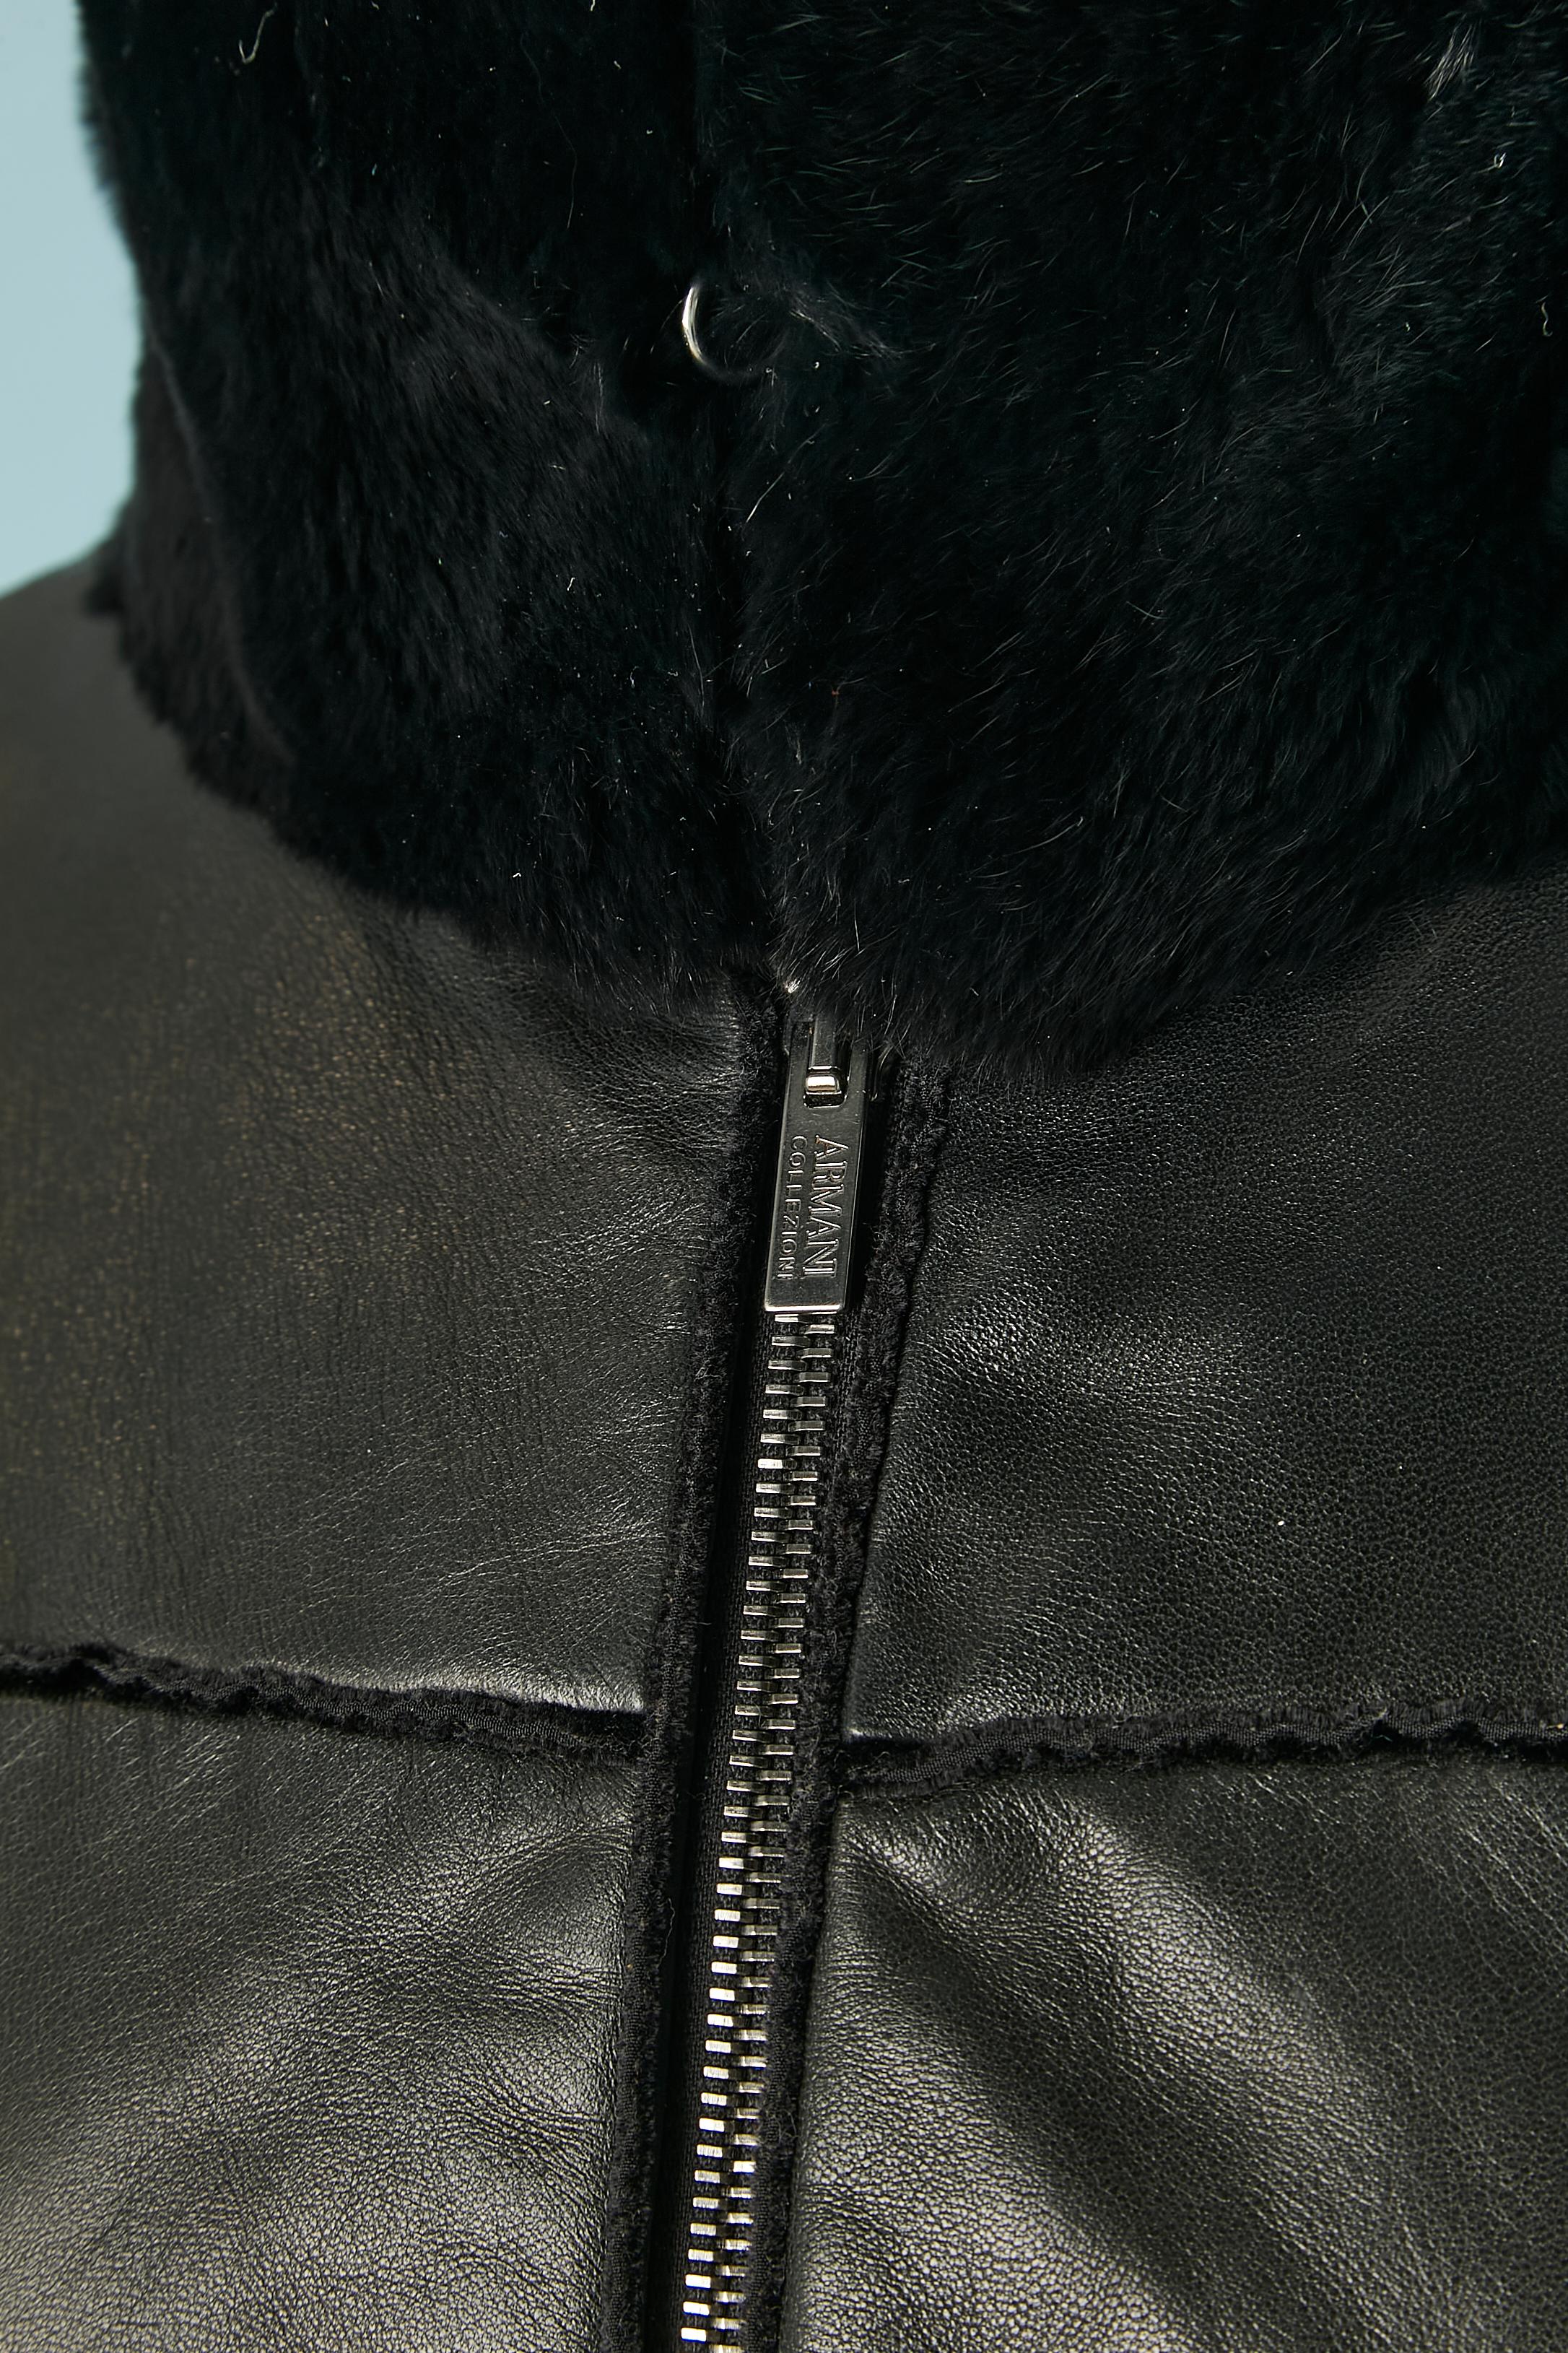 Black lamb leather anorak with fur collar. Lining: 56% rayon, 44% polyester. 
Pocket on both side with invisible zip closure. Zip closure in the middle front with branded zip puller. 
SIZE 42 (It) 38 (Fr) S/M 